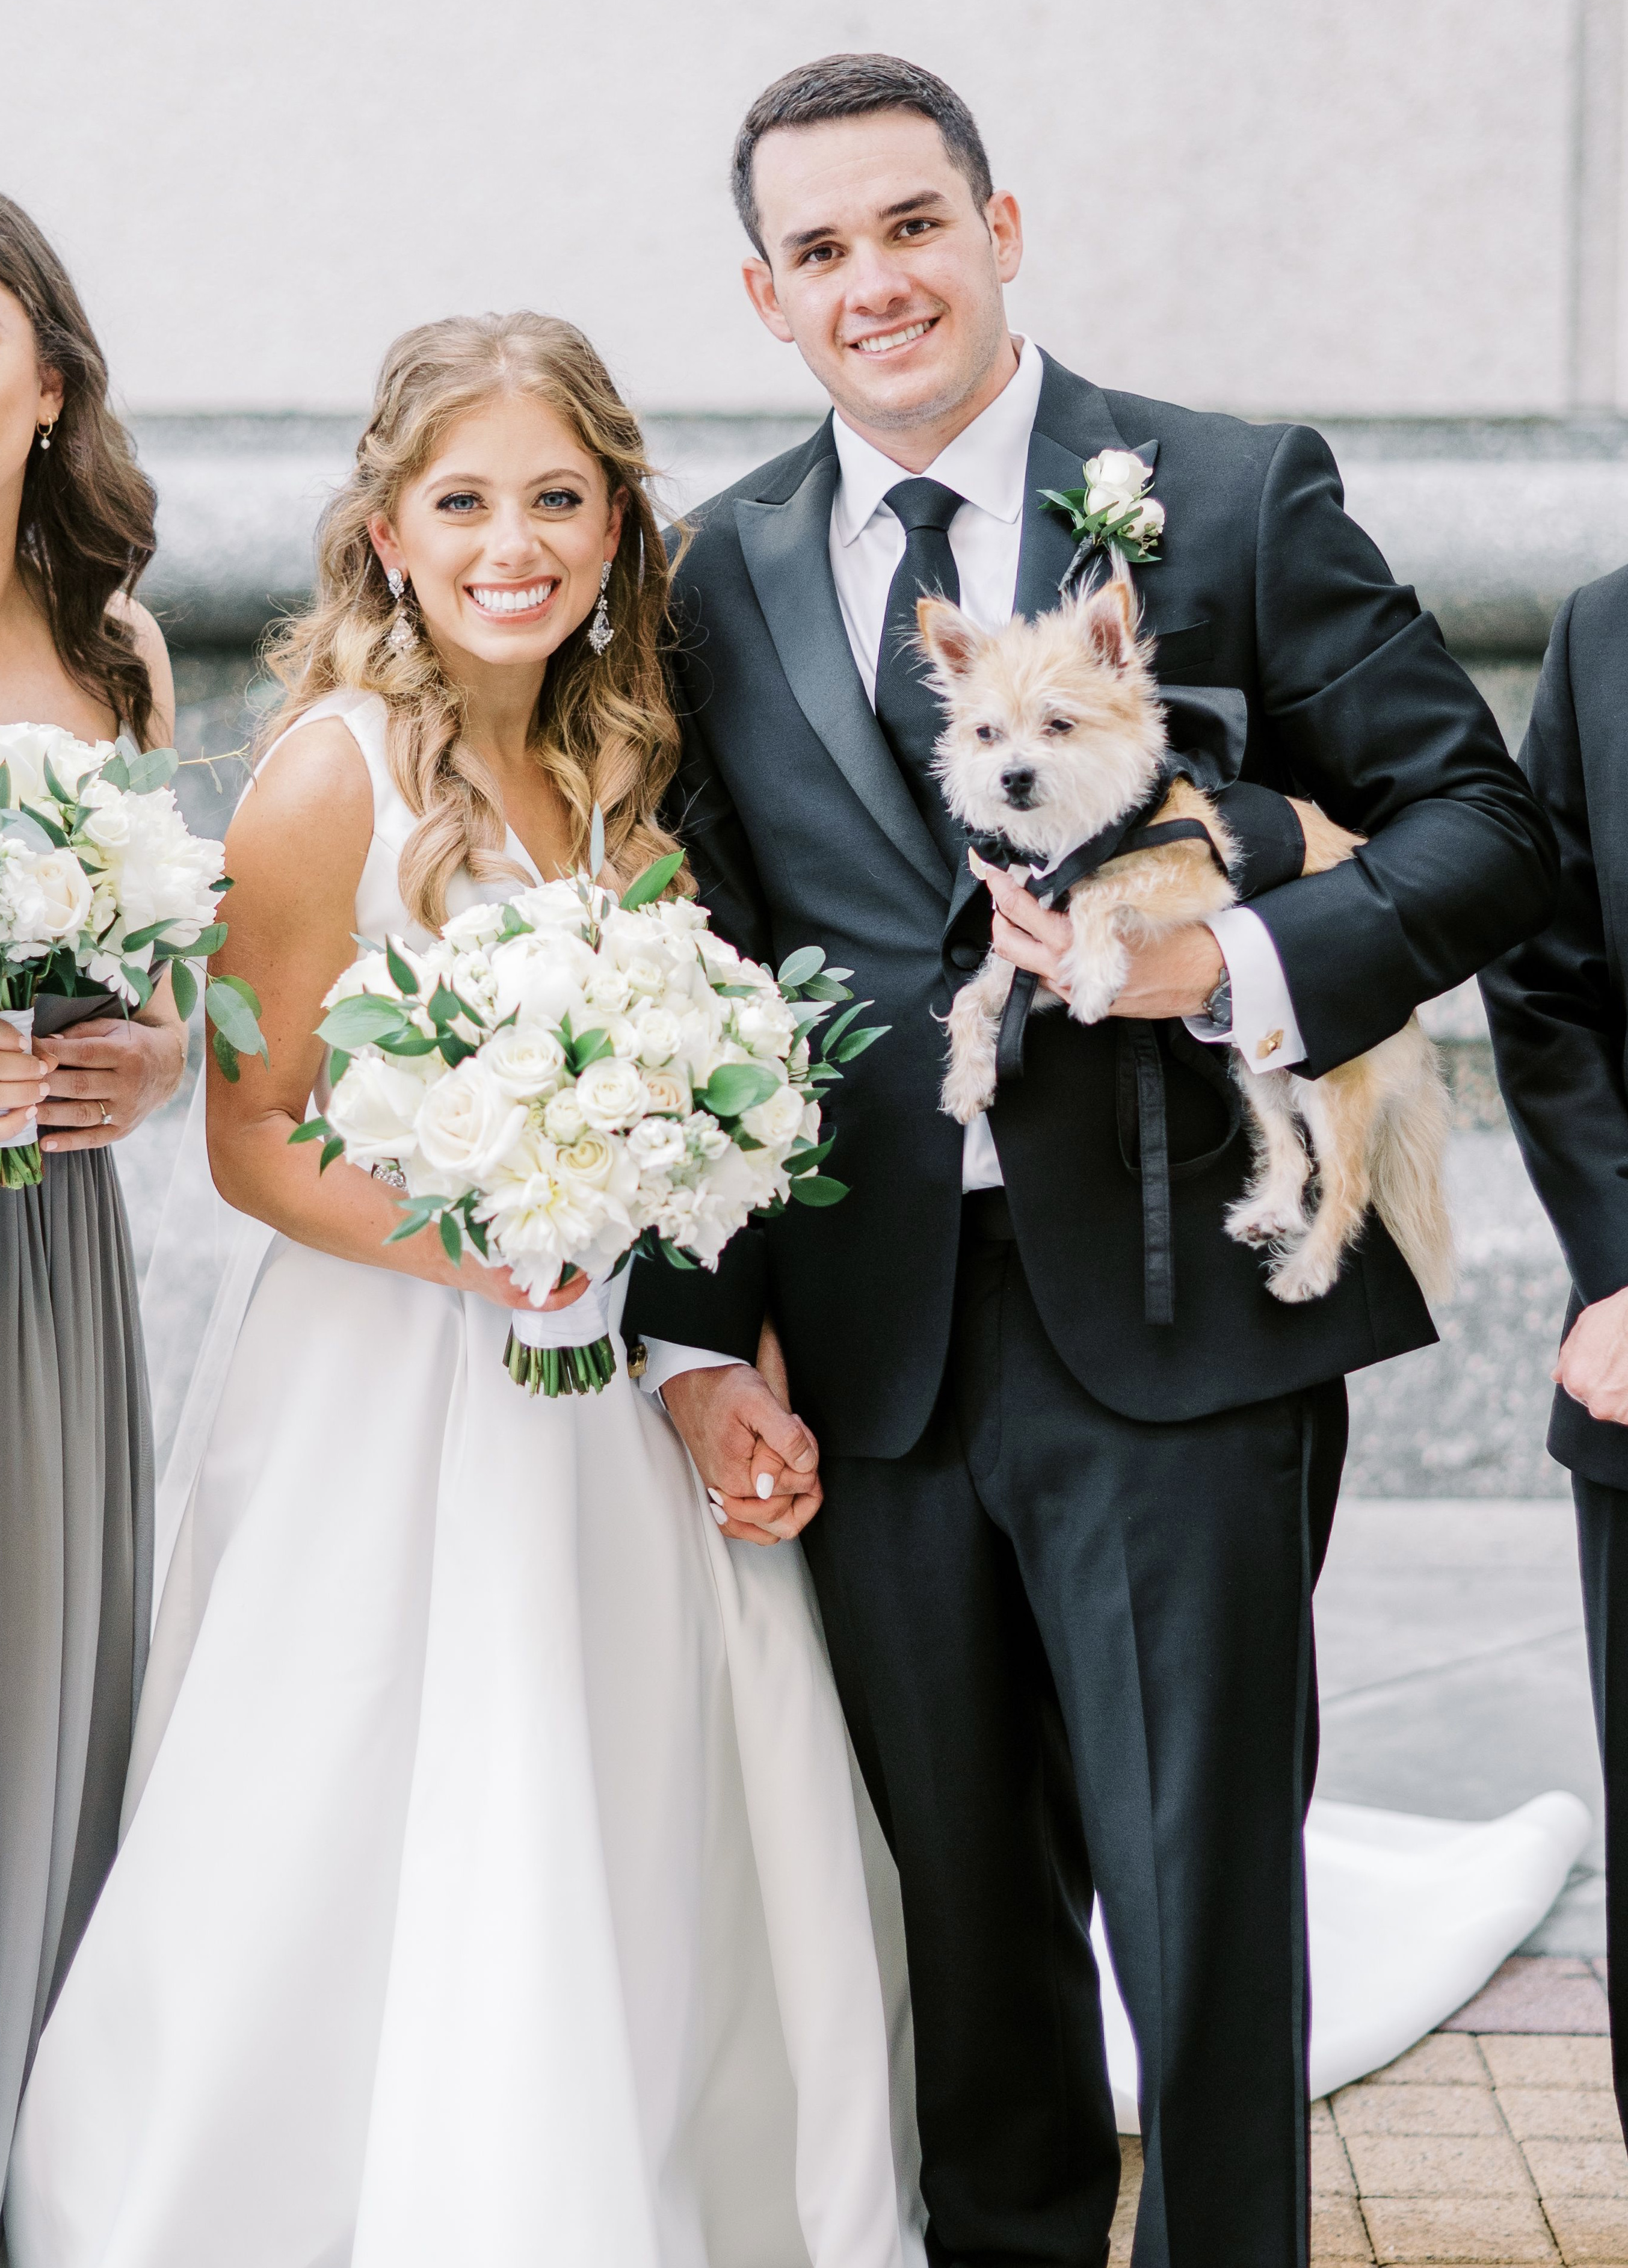 Bride and groom are holding hands while the groom holds their dog who is wearing a black tux.